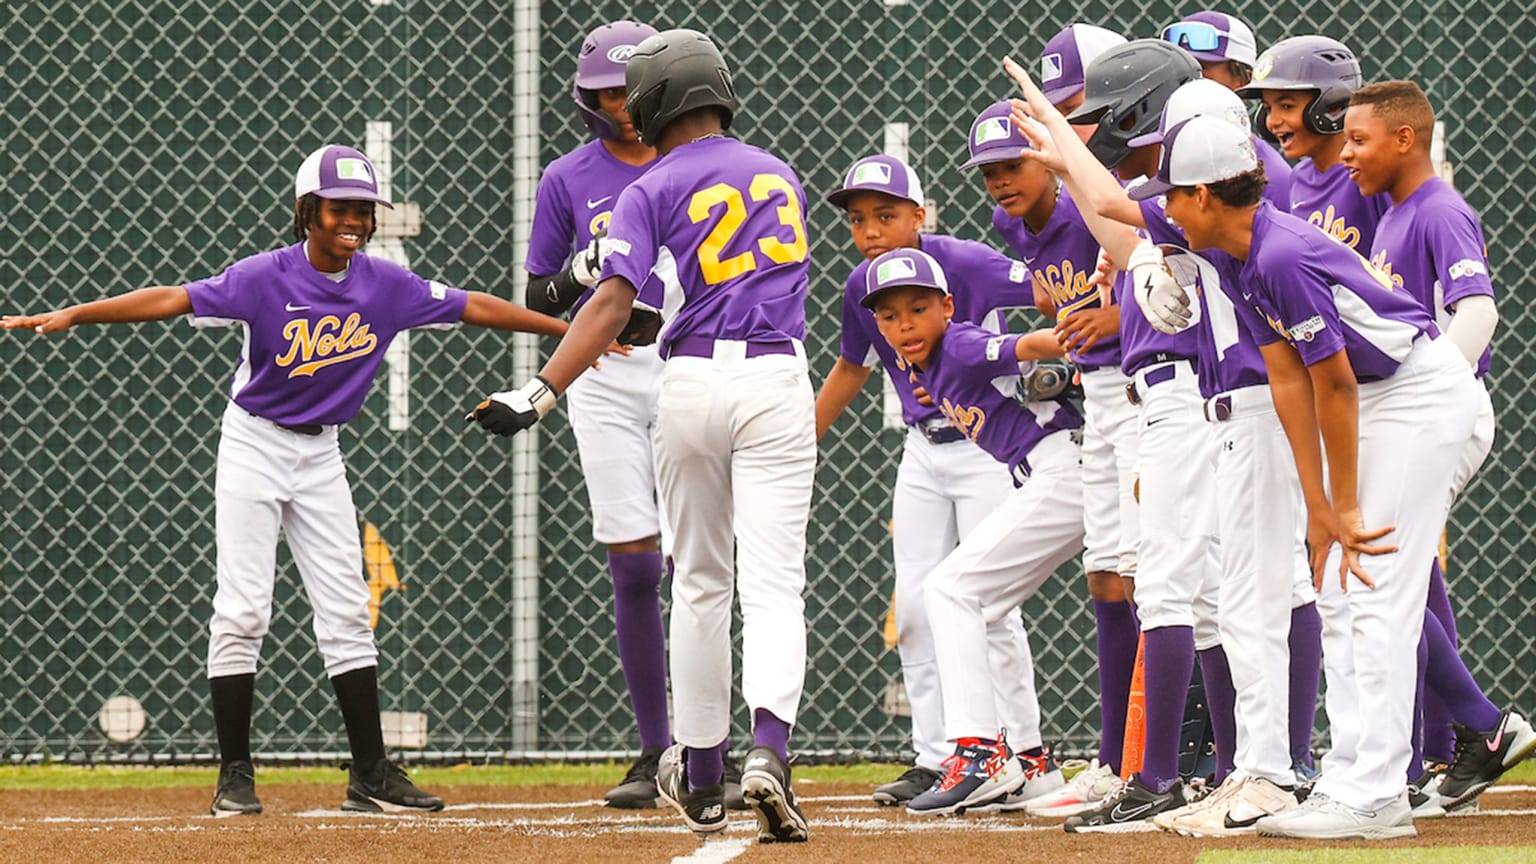 Young baseball players celebrate near home plate